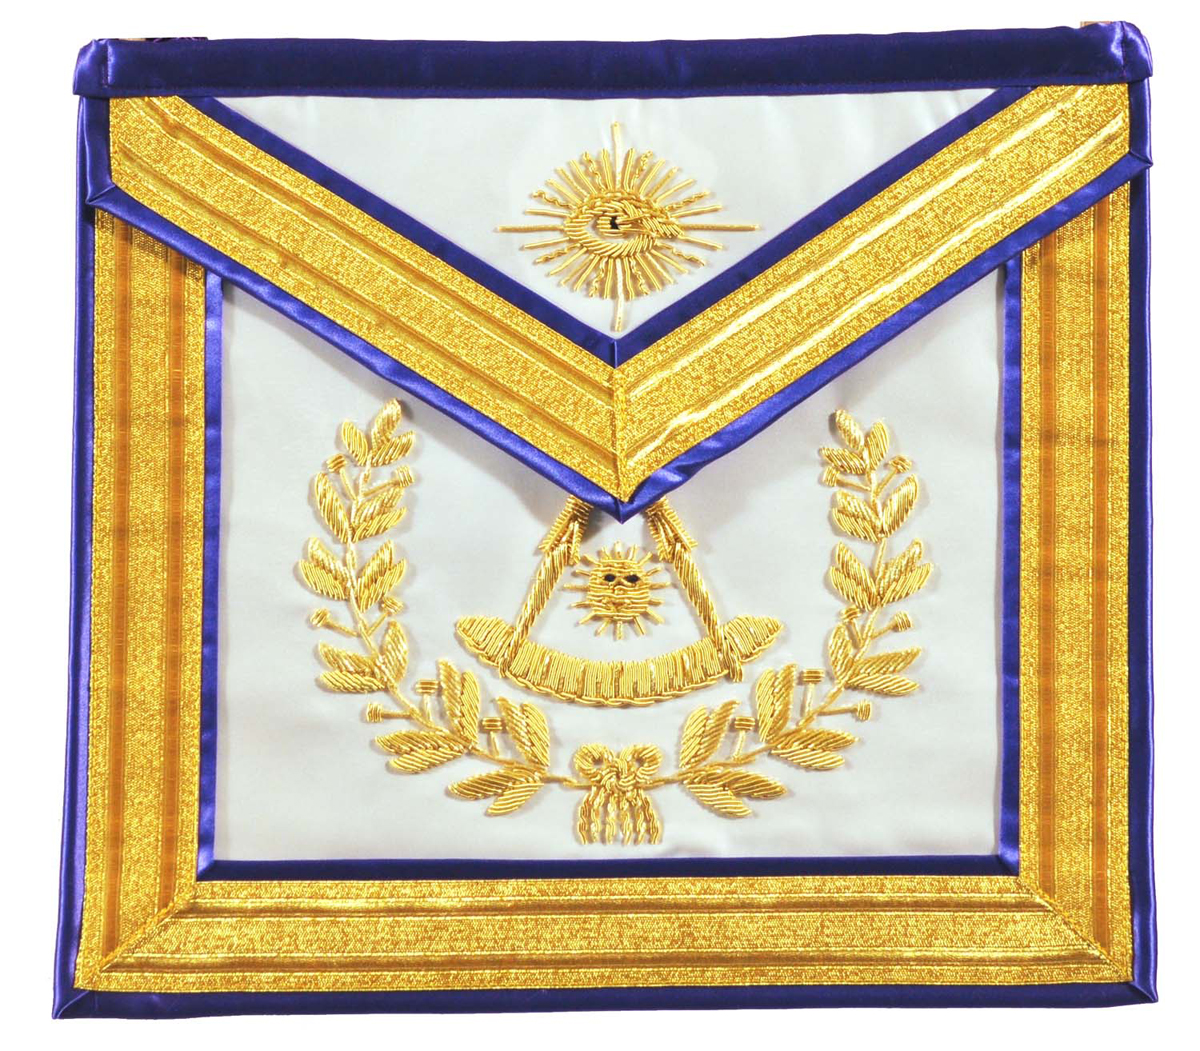 Past-Master-Apron-with-Bullion-Hand-Embroidery-P3183.aspx